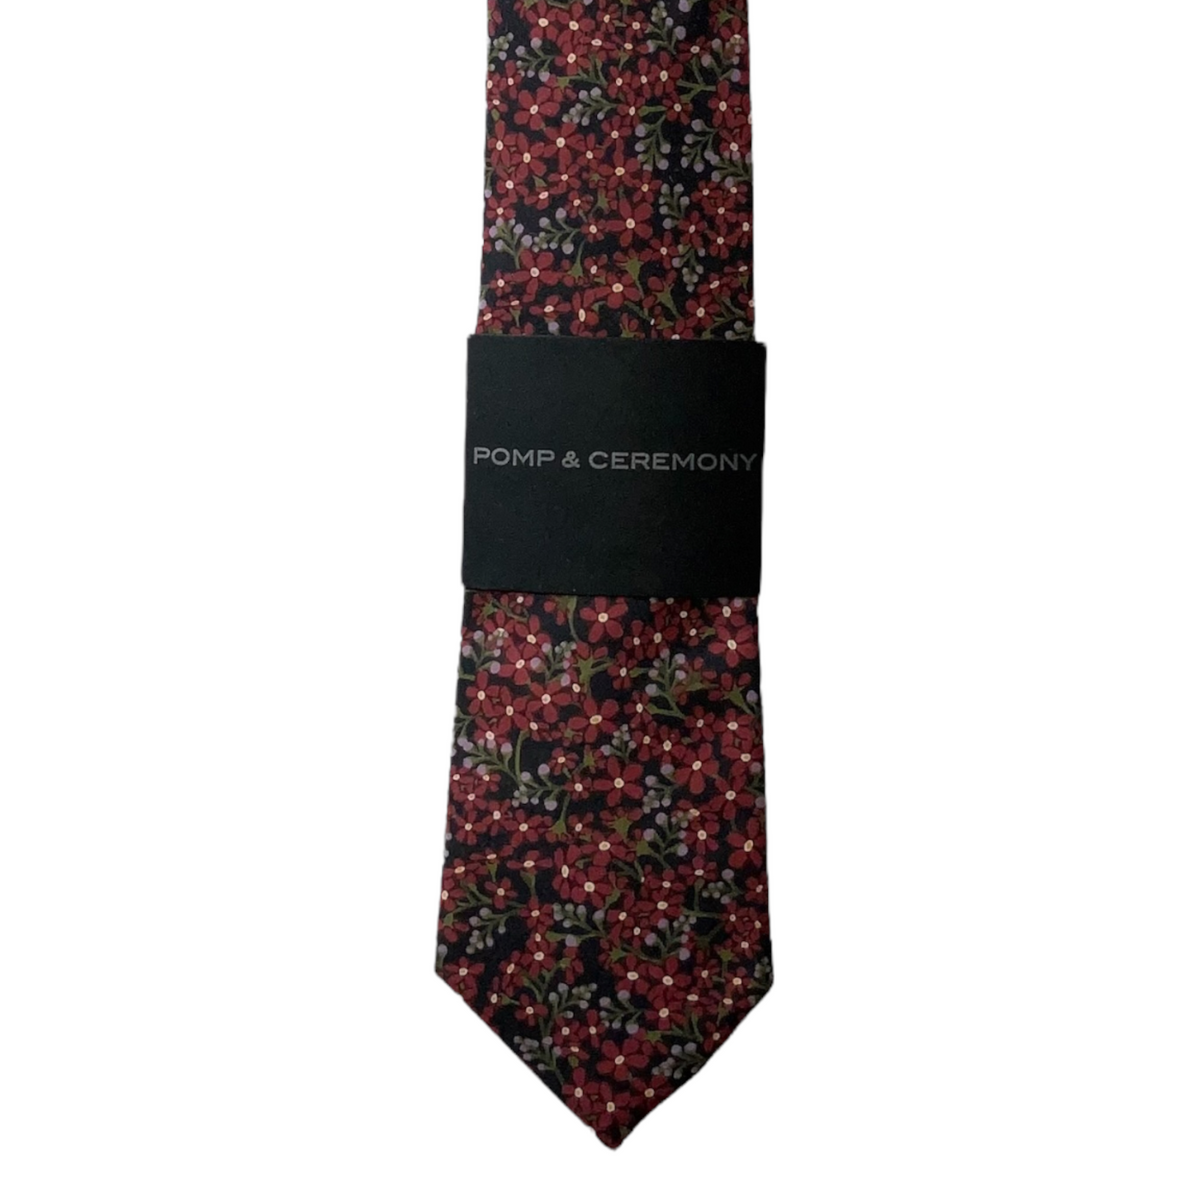 LIBERTY OF LONDON Stare Anise TIE